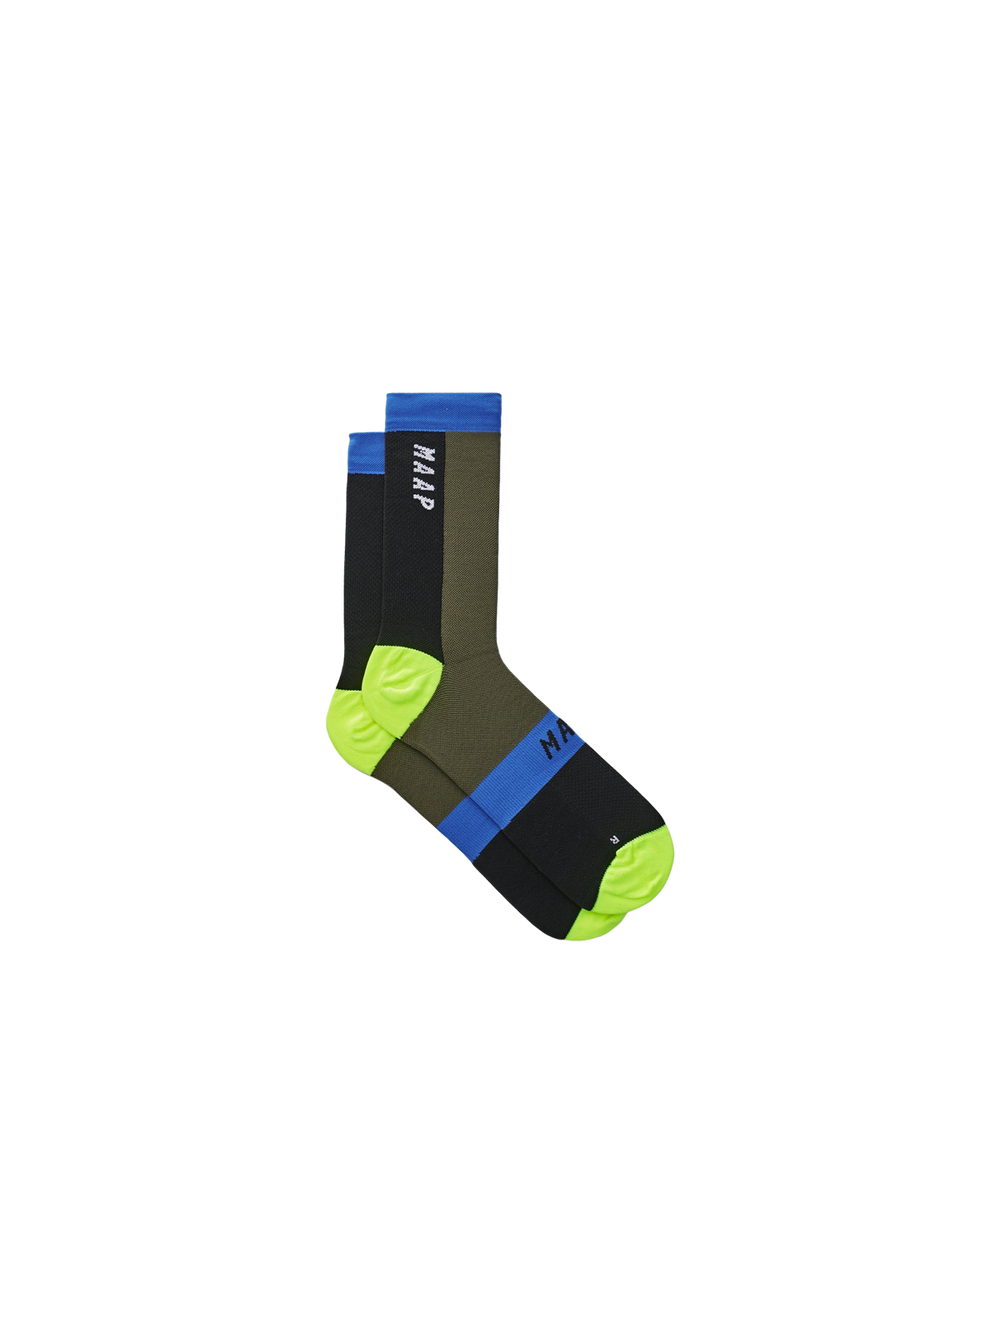 Product Image for League Sock